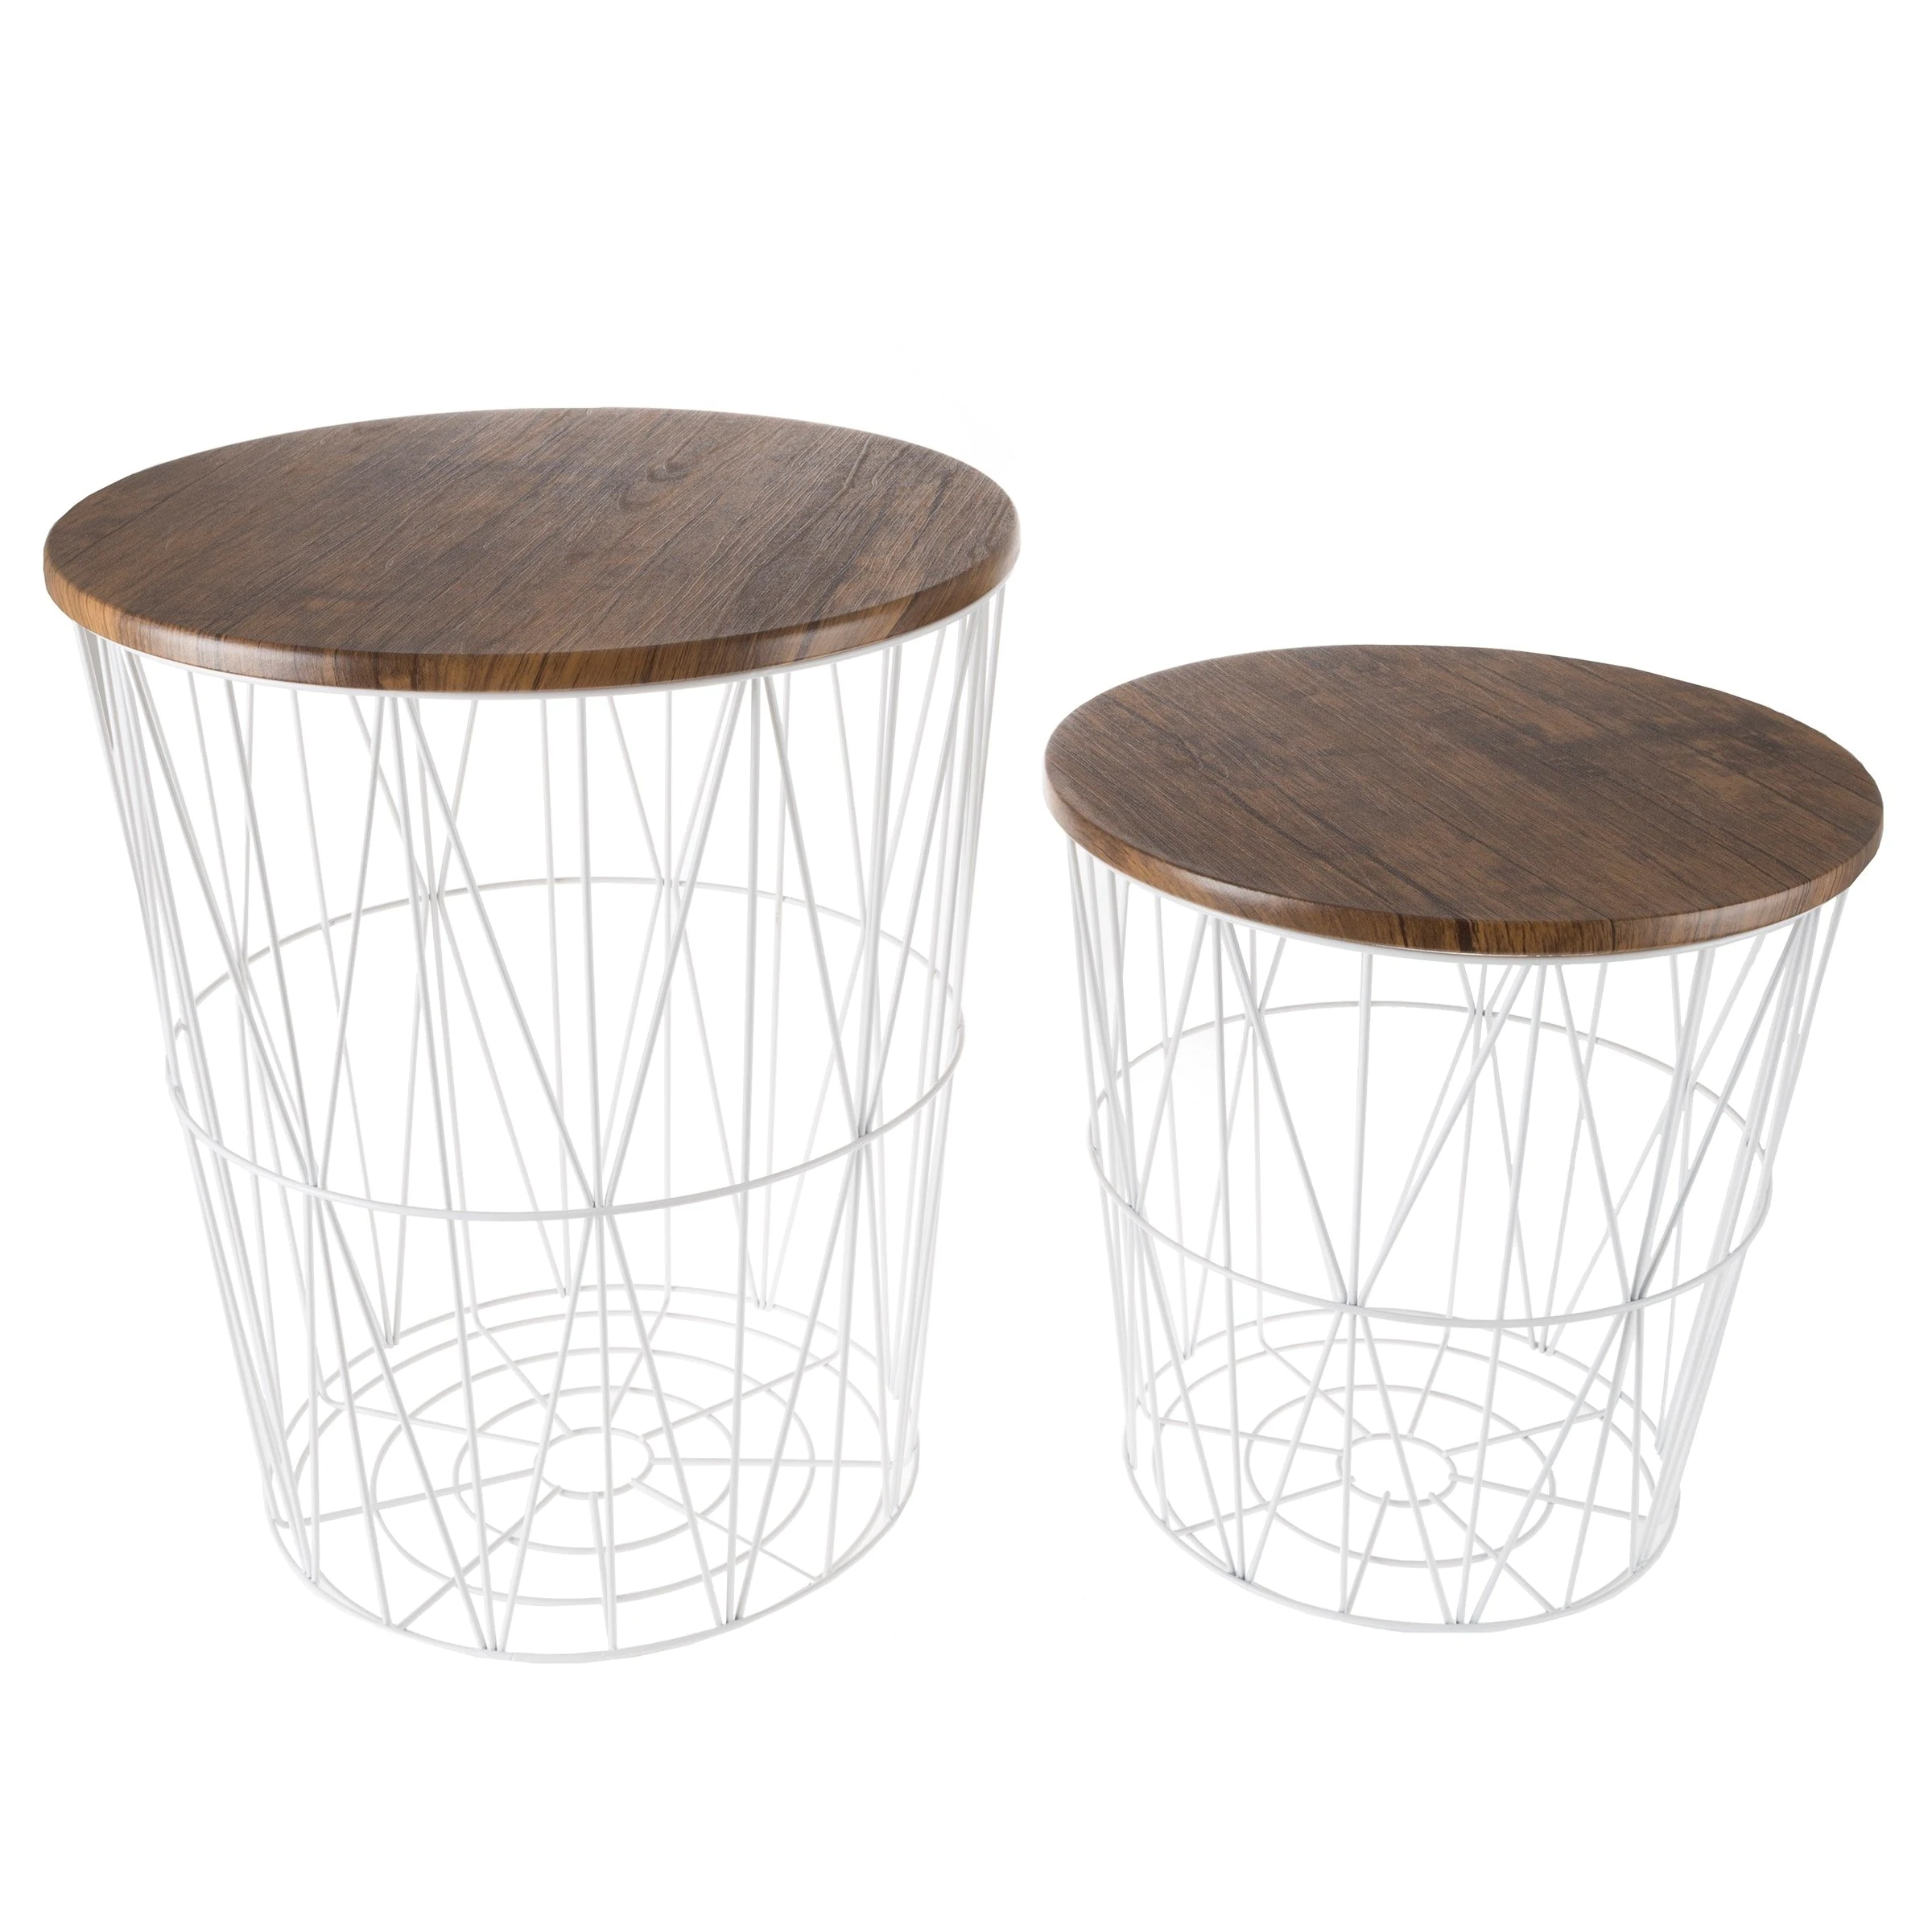 nesting end tables with storage set convertible round metal basket veneer wood top accent side lavish home table glass and coffee white plastic contemporary lamps pier tablecloth